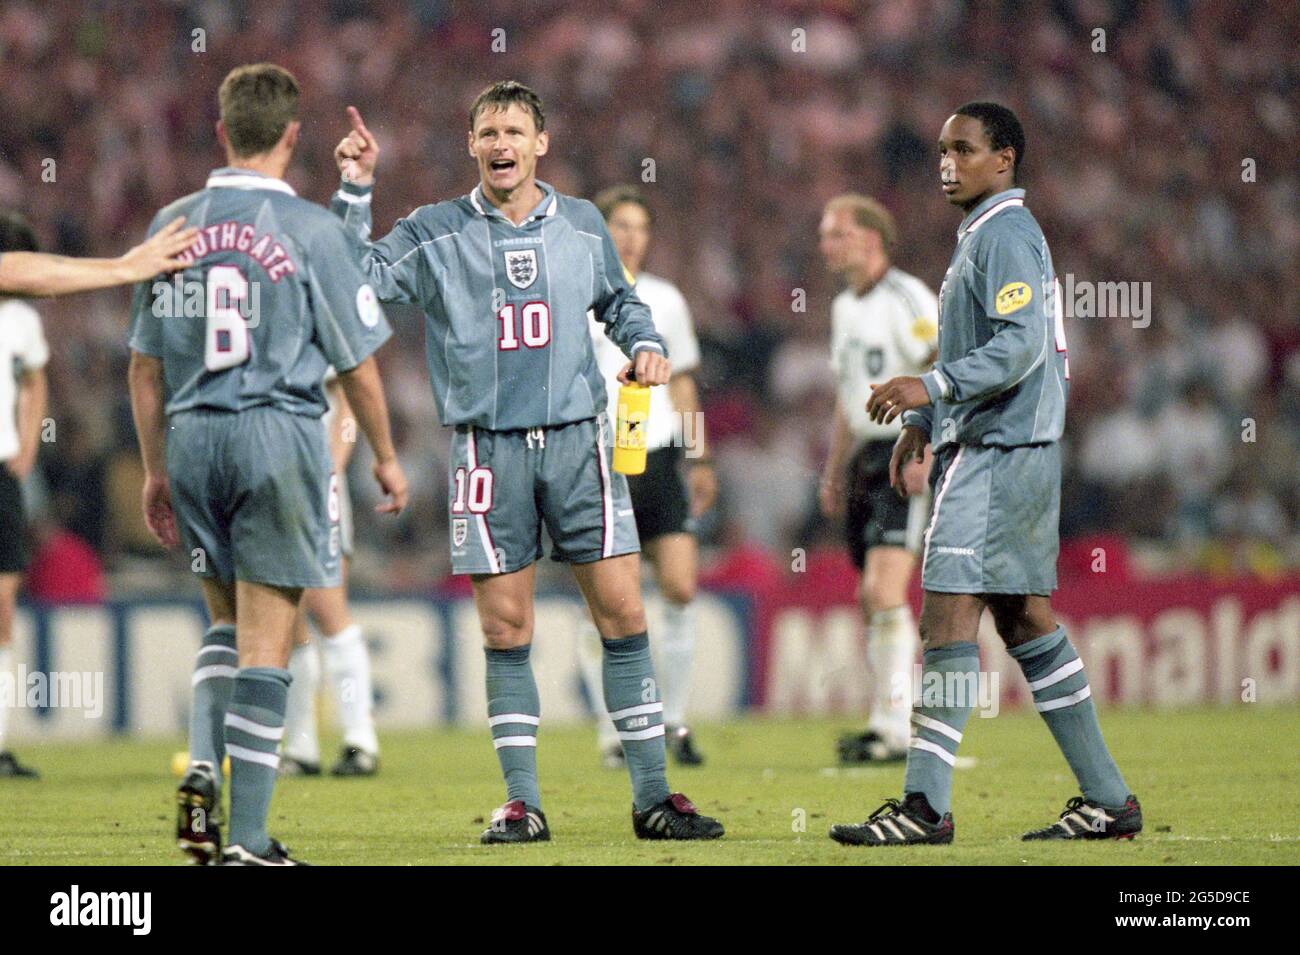 Fuvuball, firo: 26.06.1996 Fuvuball EM Euro European Championship 1996 semifinals, knockout phase, semi finals, archive photo, archive images Germany - England 6: 5 im, after penalty shootouts Teddy Sheringham, whole figure, gesture, with, and, Paul Ince, Gareth Southgate Stock Photo